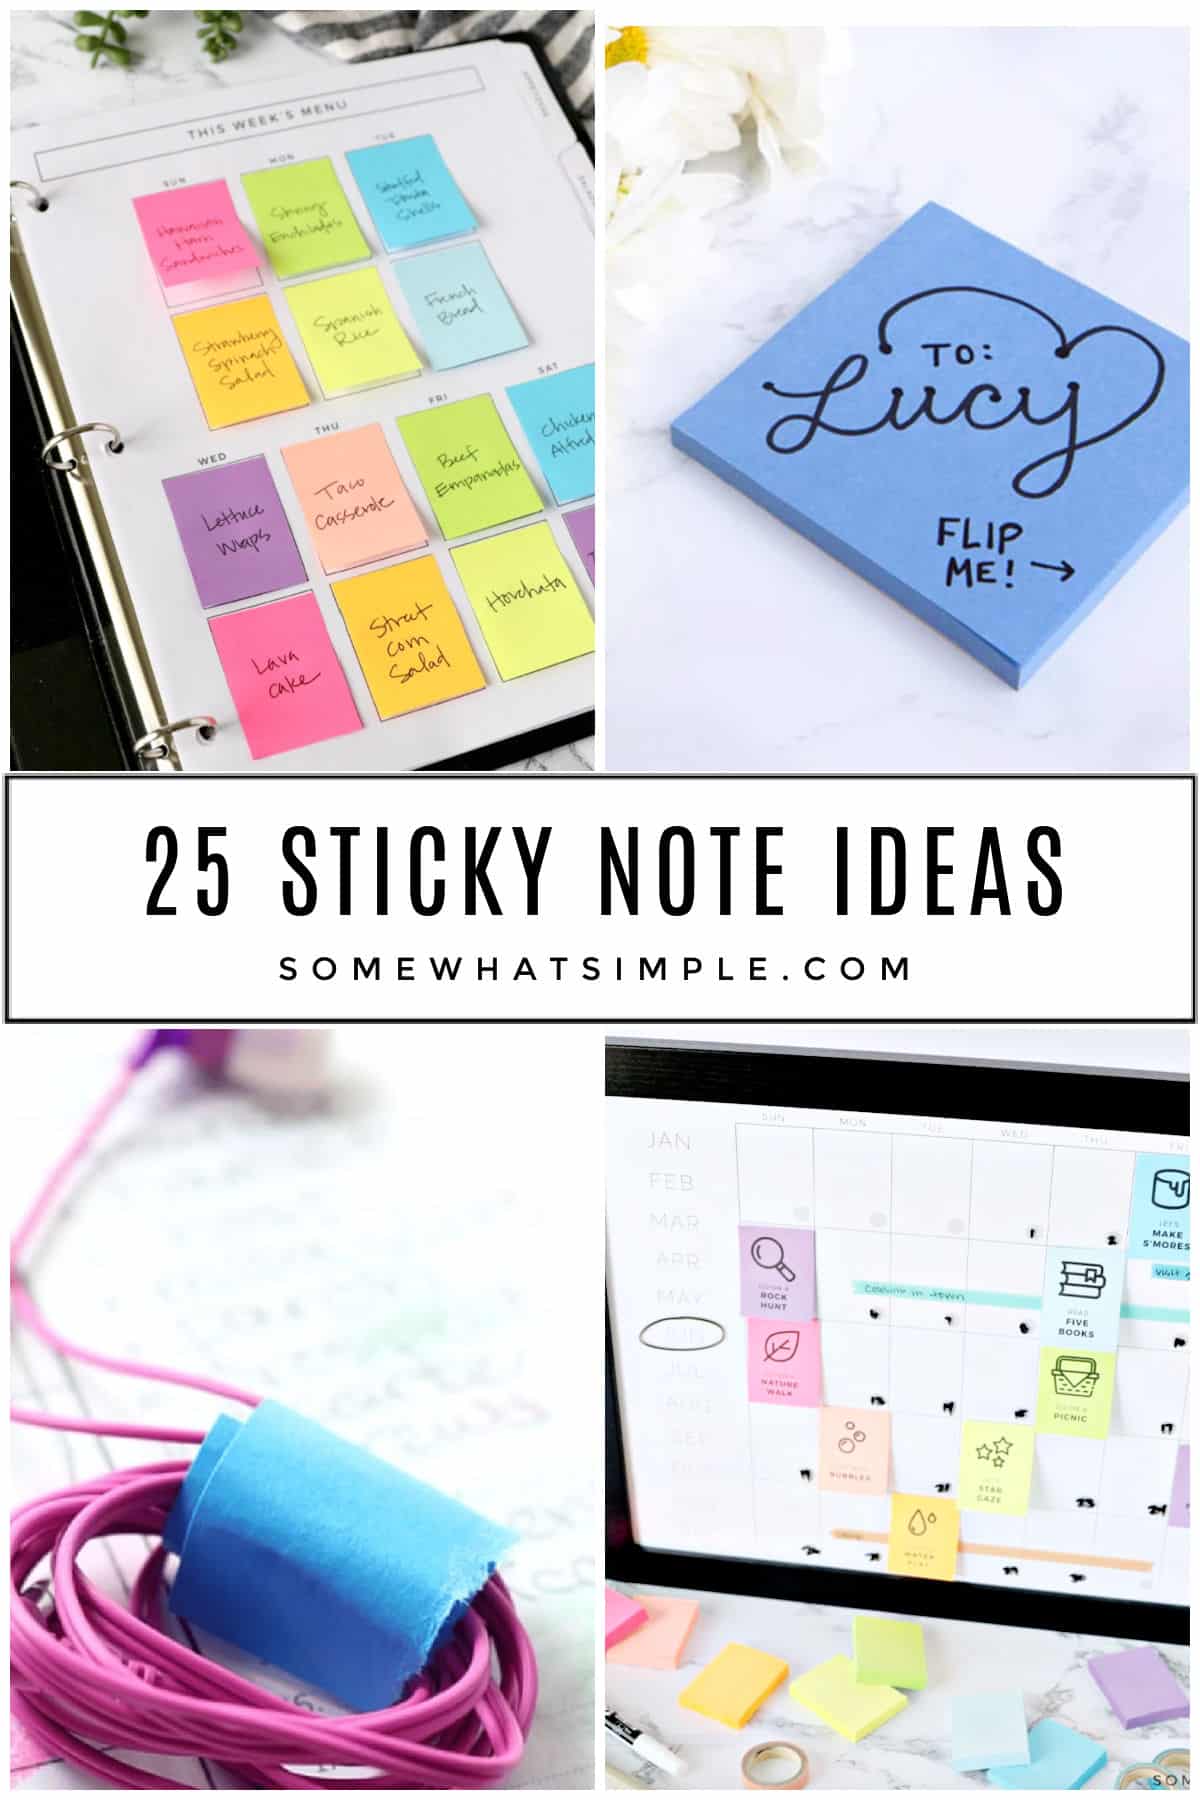 Sticky squares of paper can serve as more than just a temporary place to jot down a note. Here are 25 creative ways to use sticky notes. via @somewhatsimple